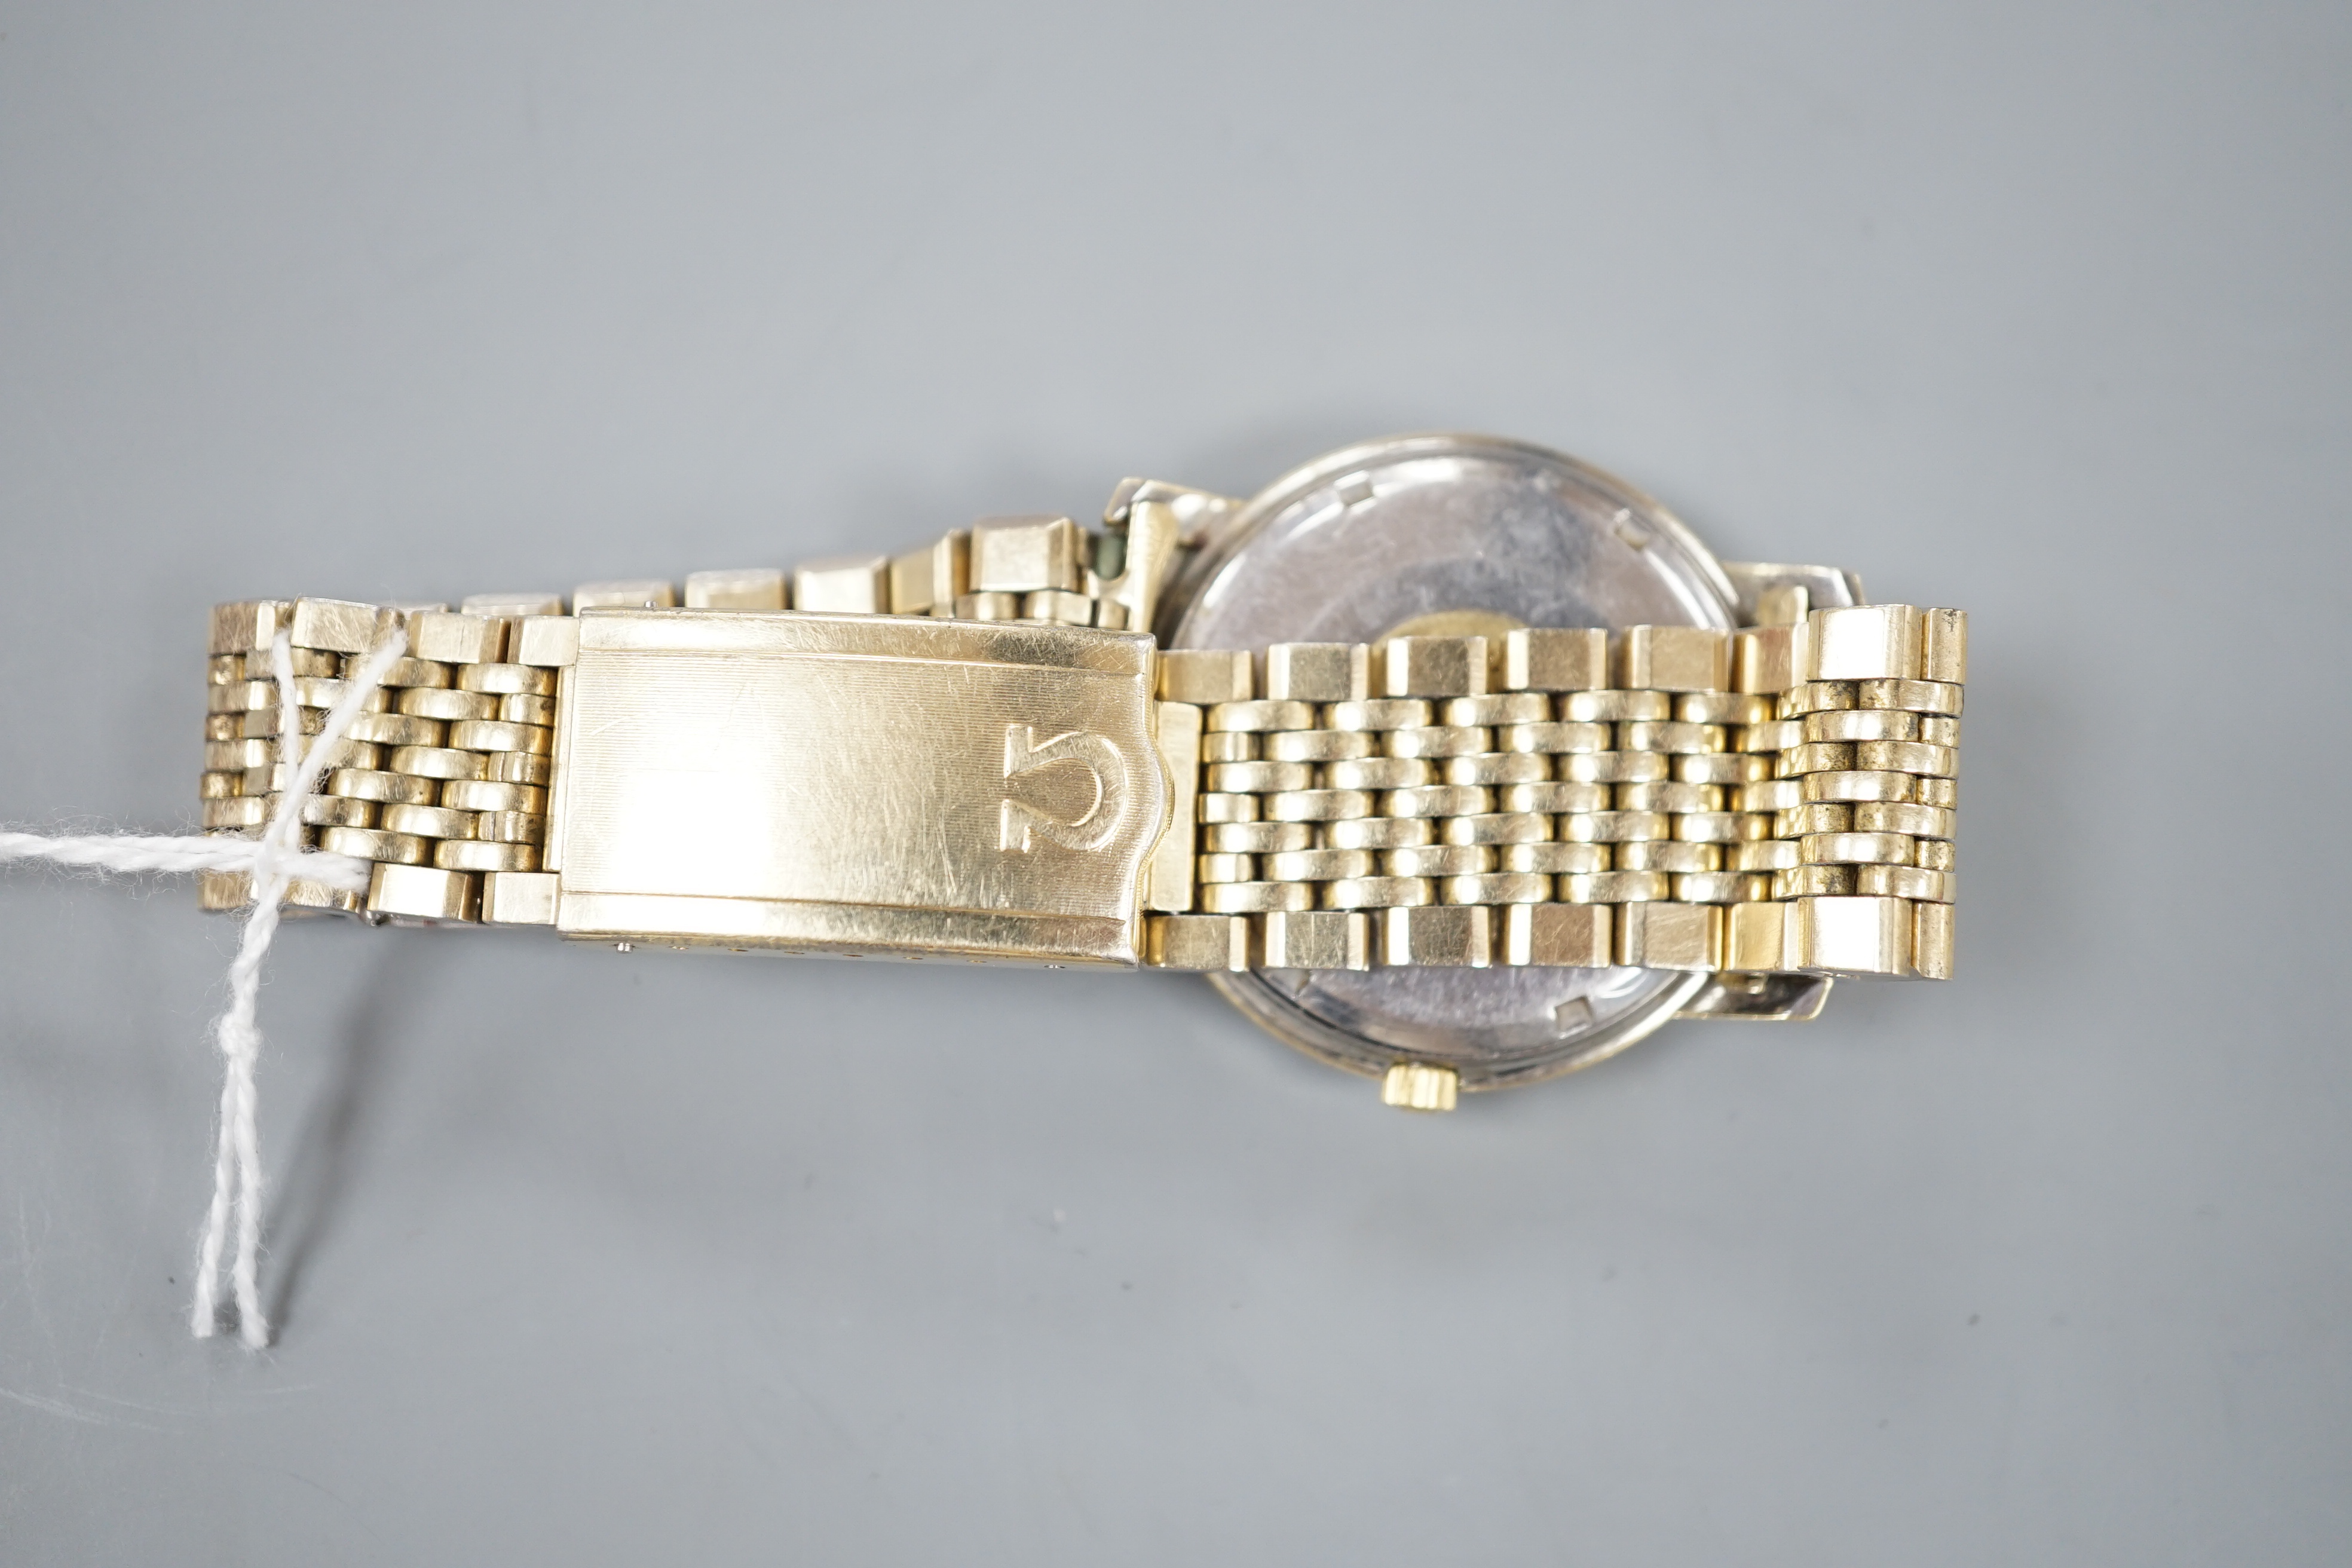 A gentleman's steel and gold plated Omega constellation automatic wrist watch, on an Omega gold plated bracelet.